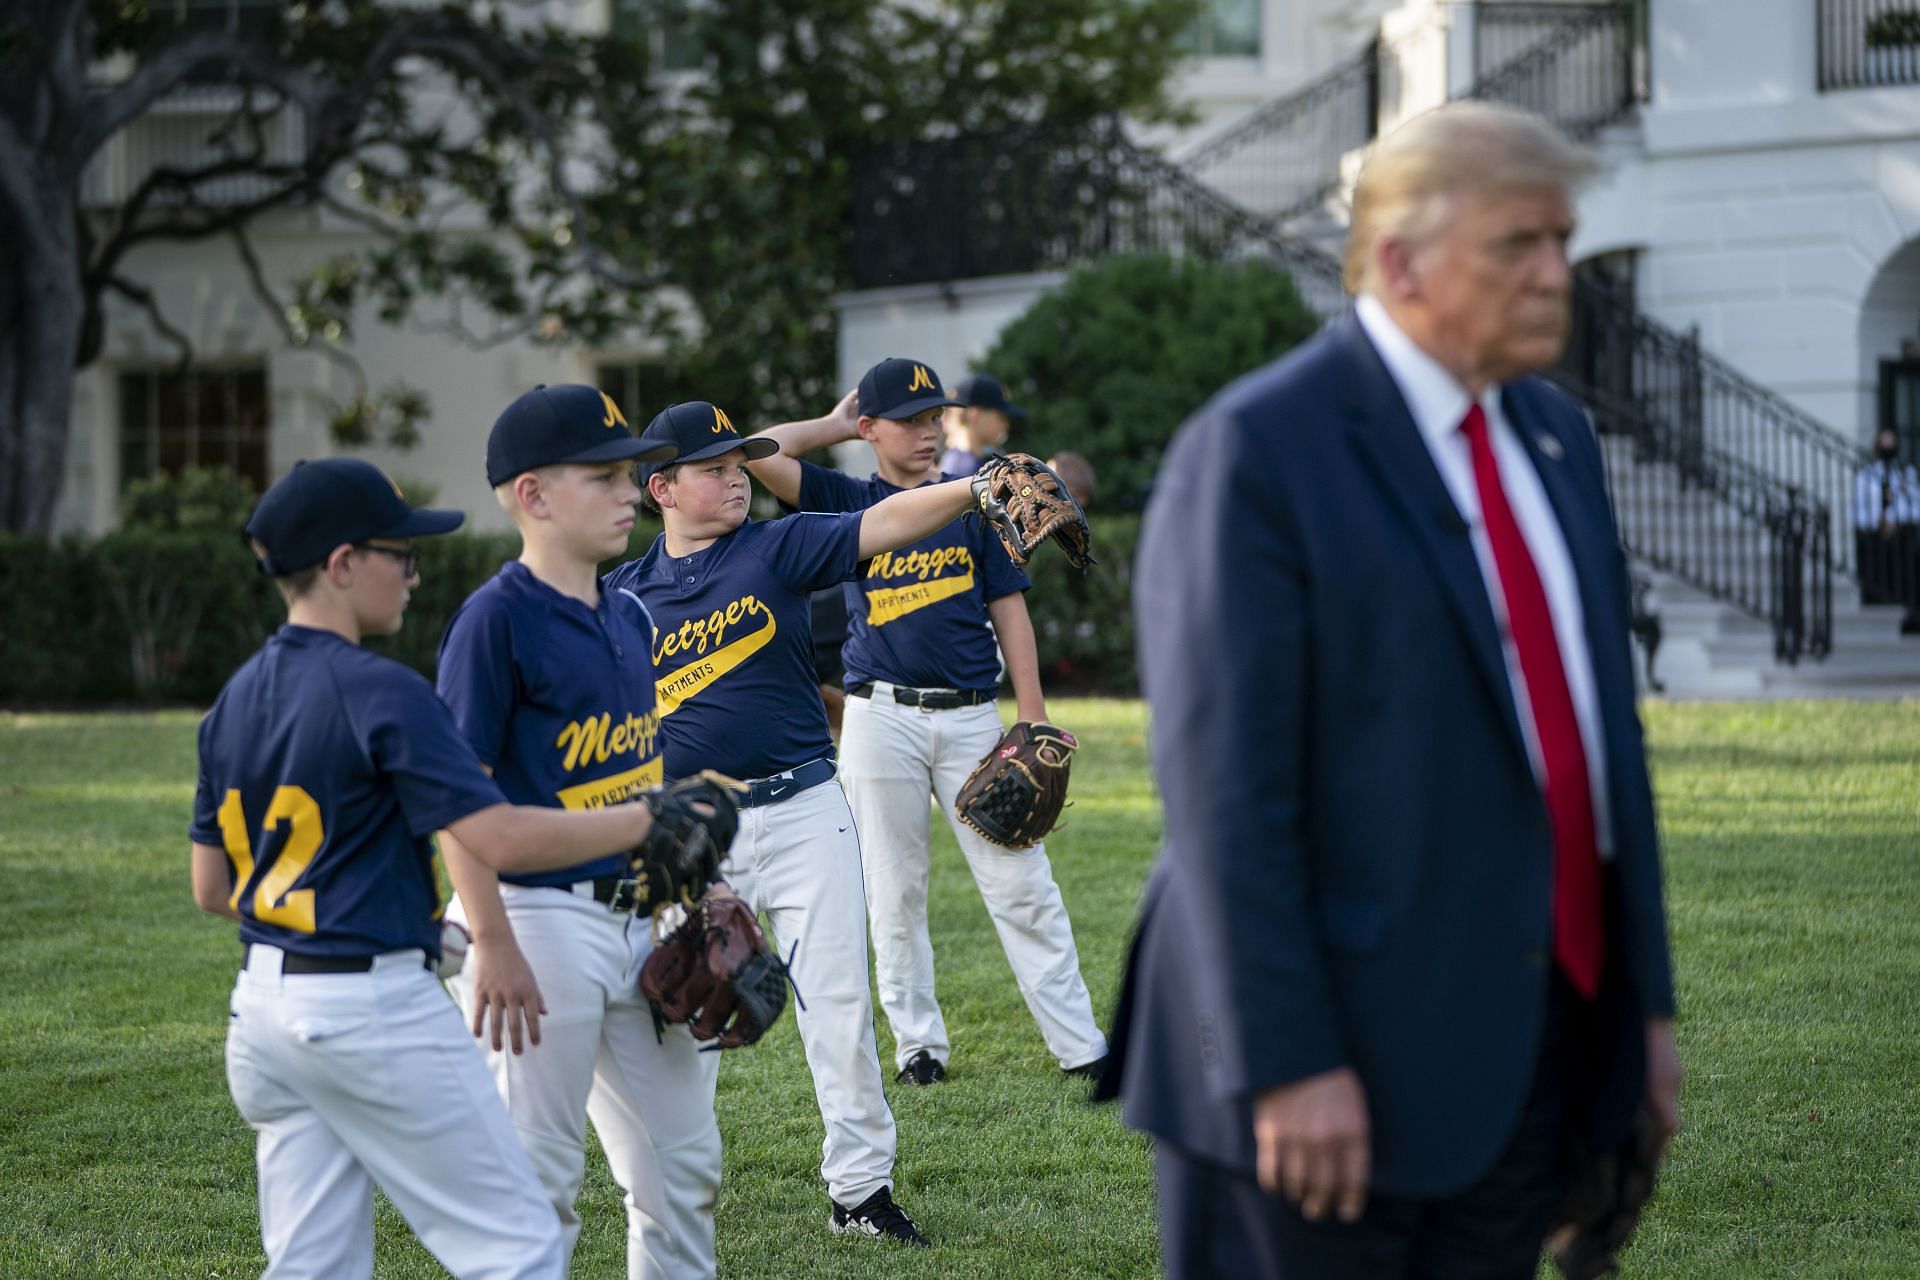 Donald Trump declined a first pitch opportunity